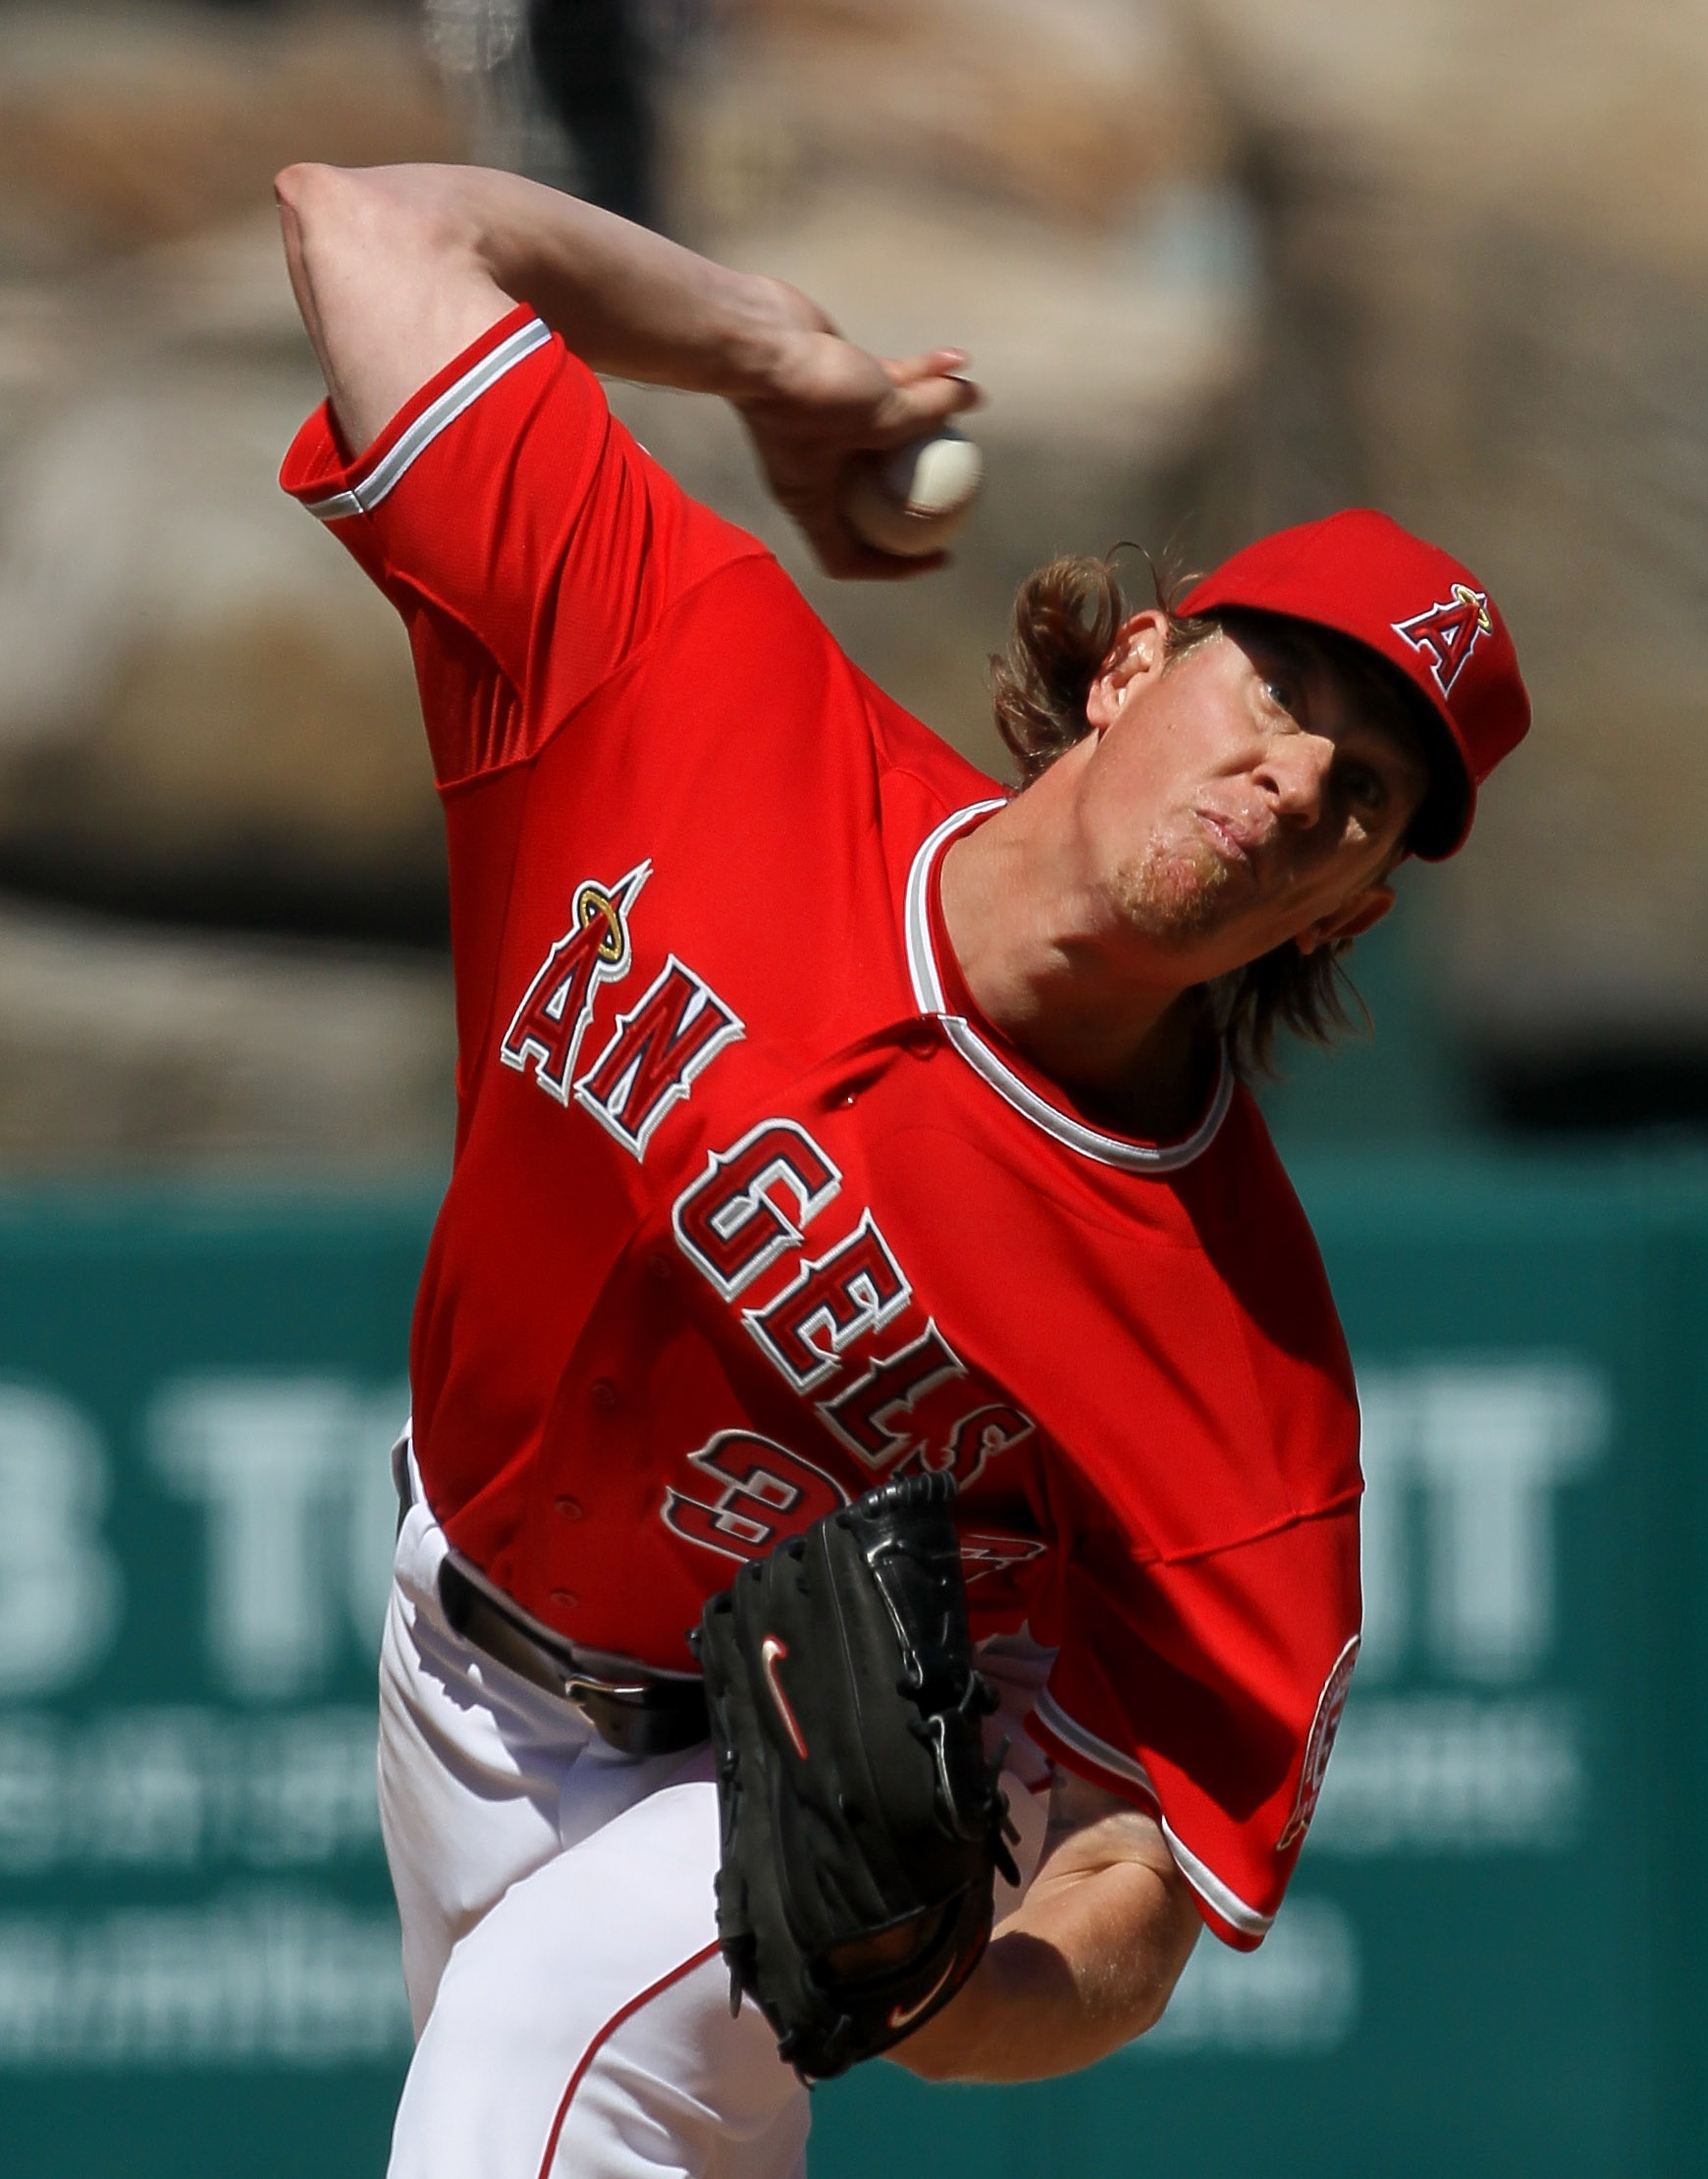 ANAHEIM, CA - APRIL 10:  Jered Weaver #36 of the Los Angeles Angels of Anaheim throws a pitch against the Toronto Blue Jays on April 10, 2011 at Angel Stadium in Anaheim, California. The Angels won 3-1.  (Photo by Stephen Dunn/Getty Images)